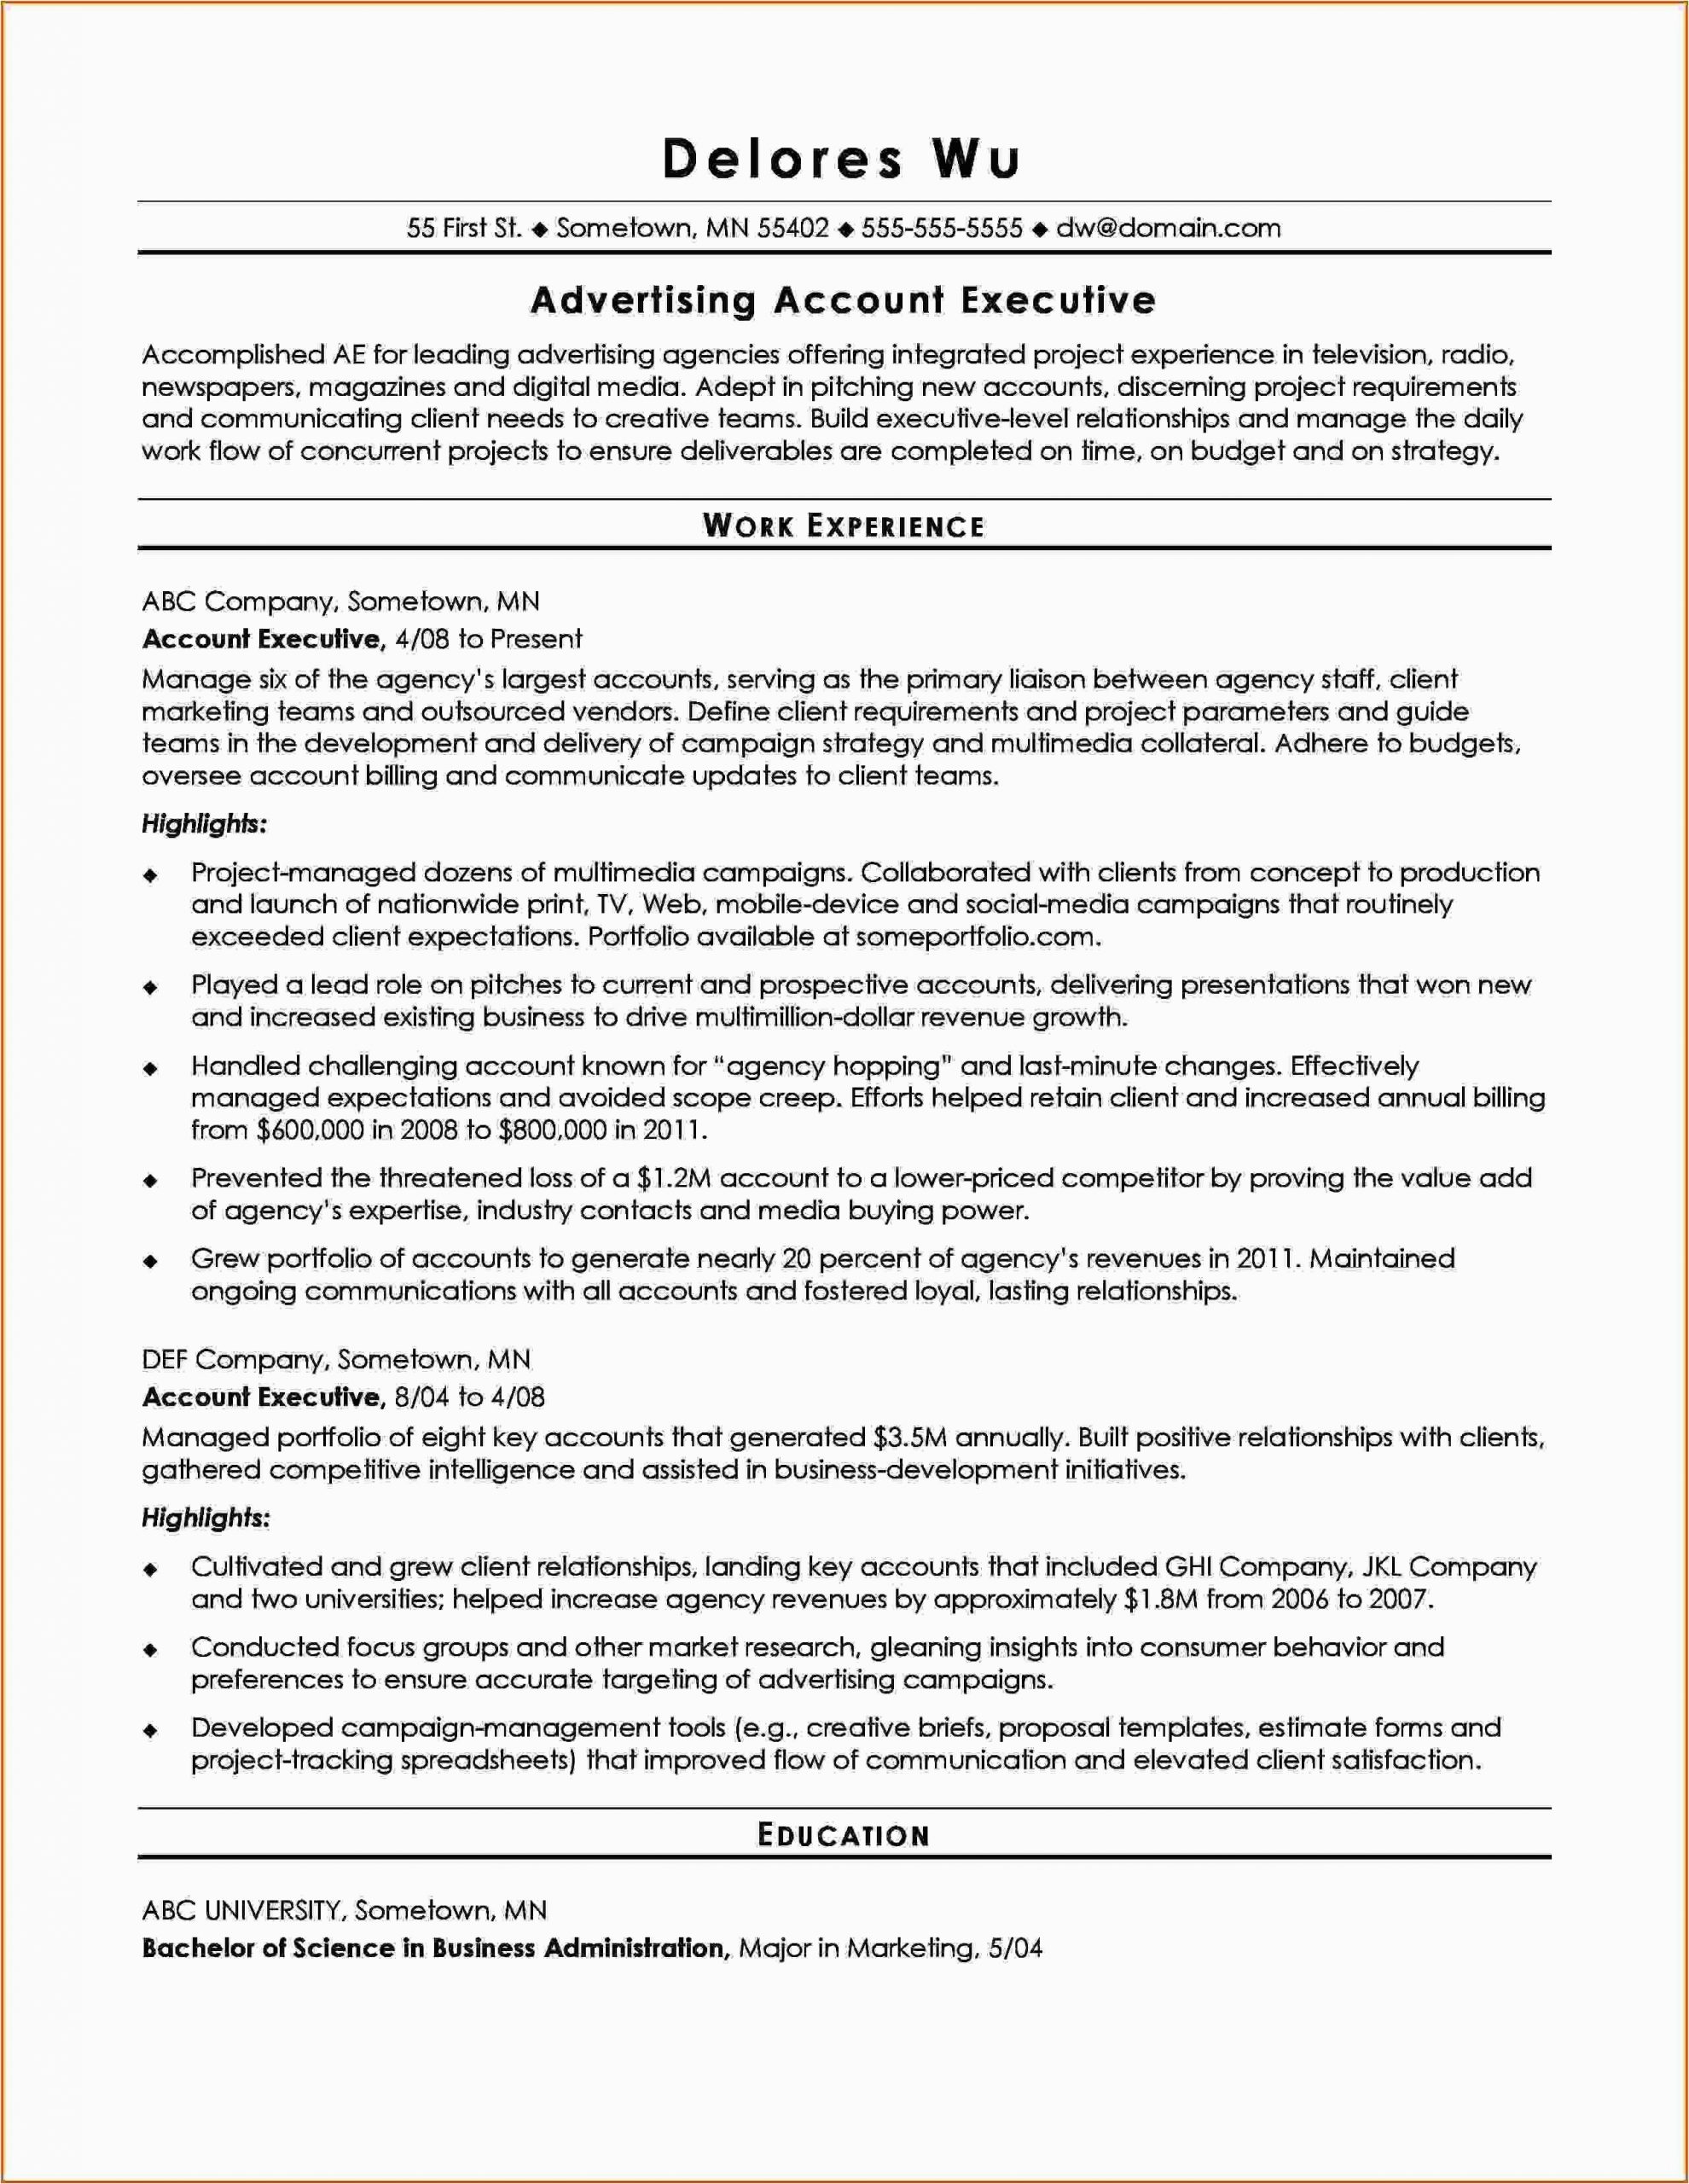 resume in ats format